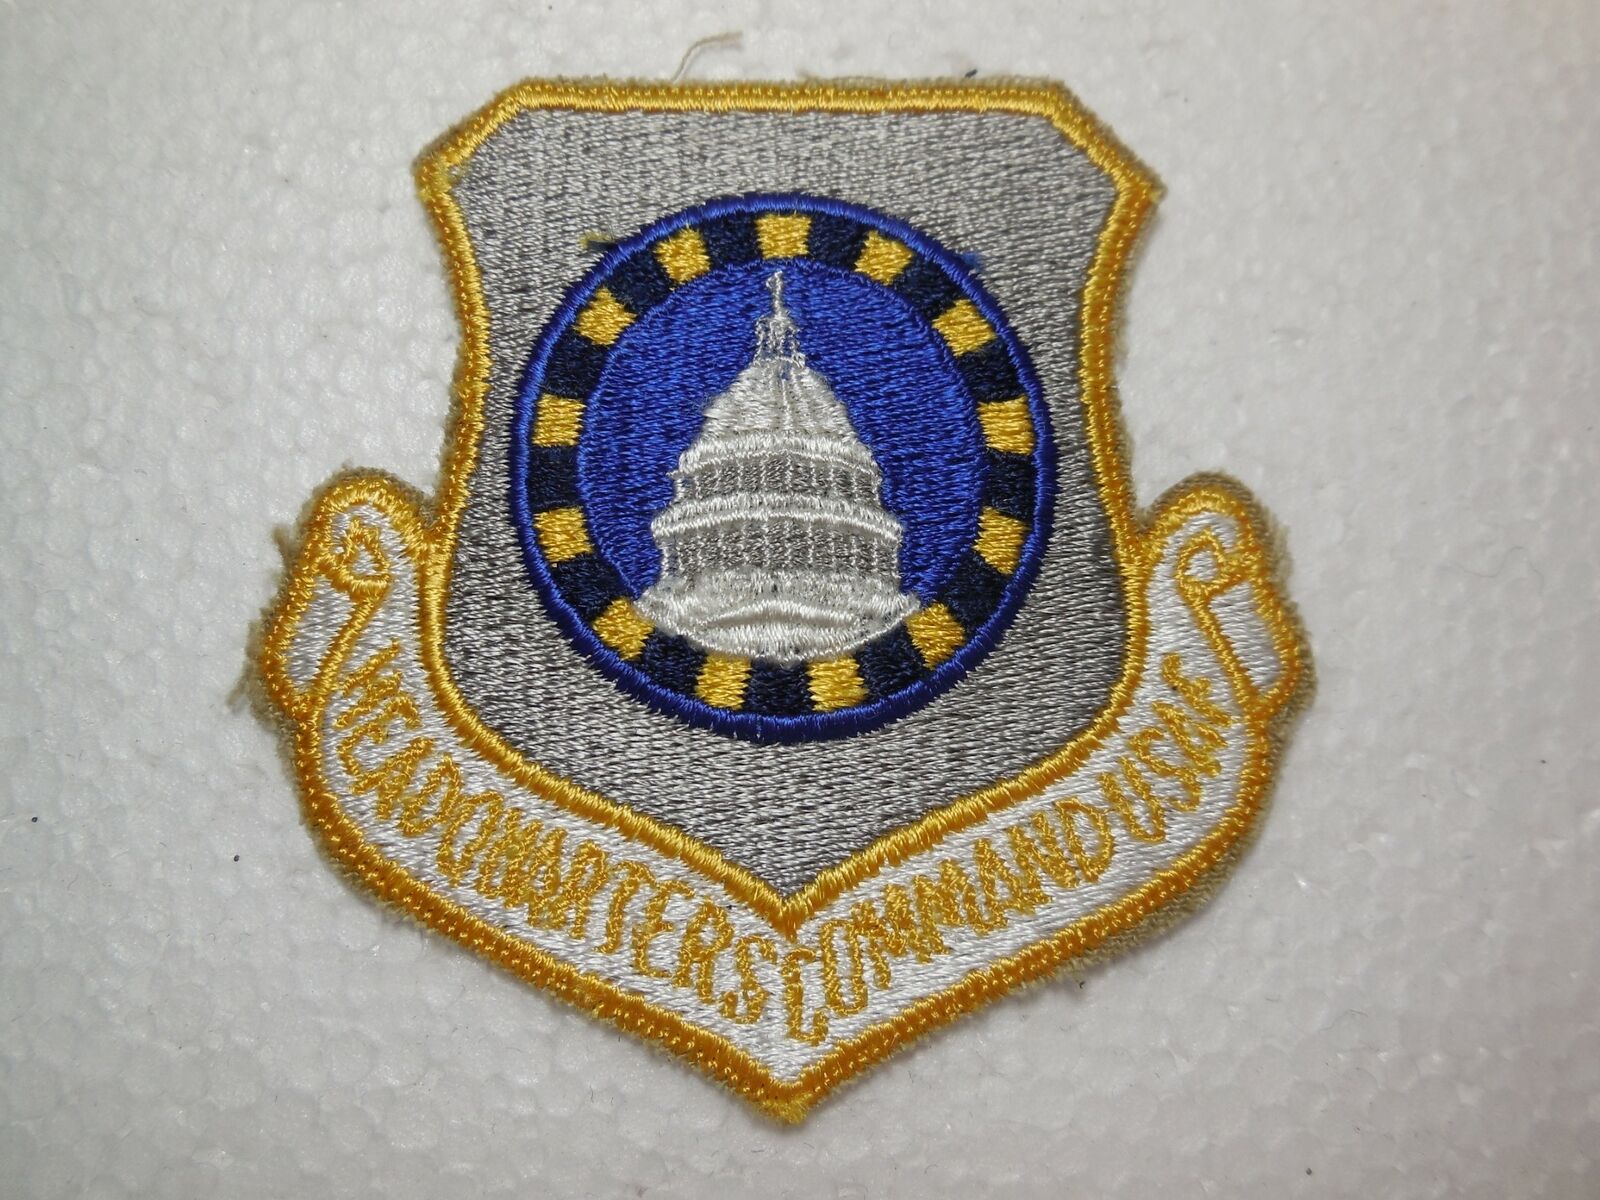 USAF AIR FORCE HEADQUARTERS COMMAND USAF PATCH FREE USA SHIPPING